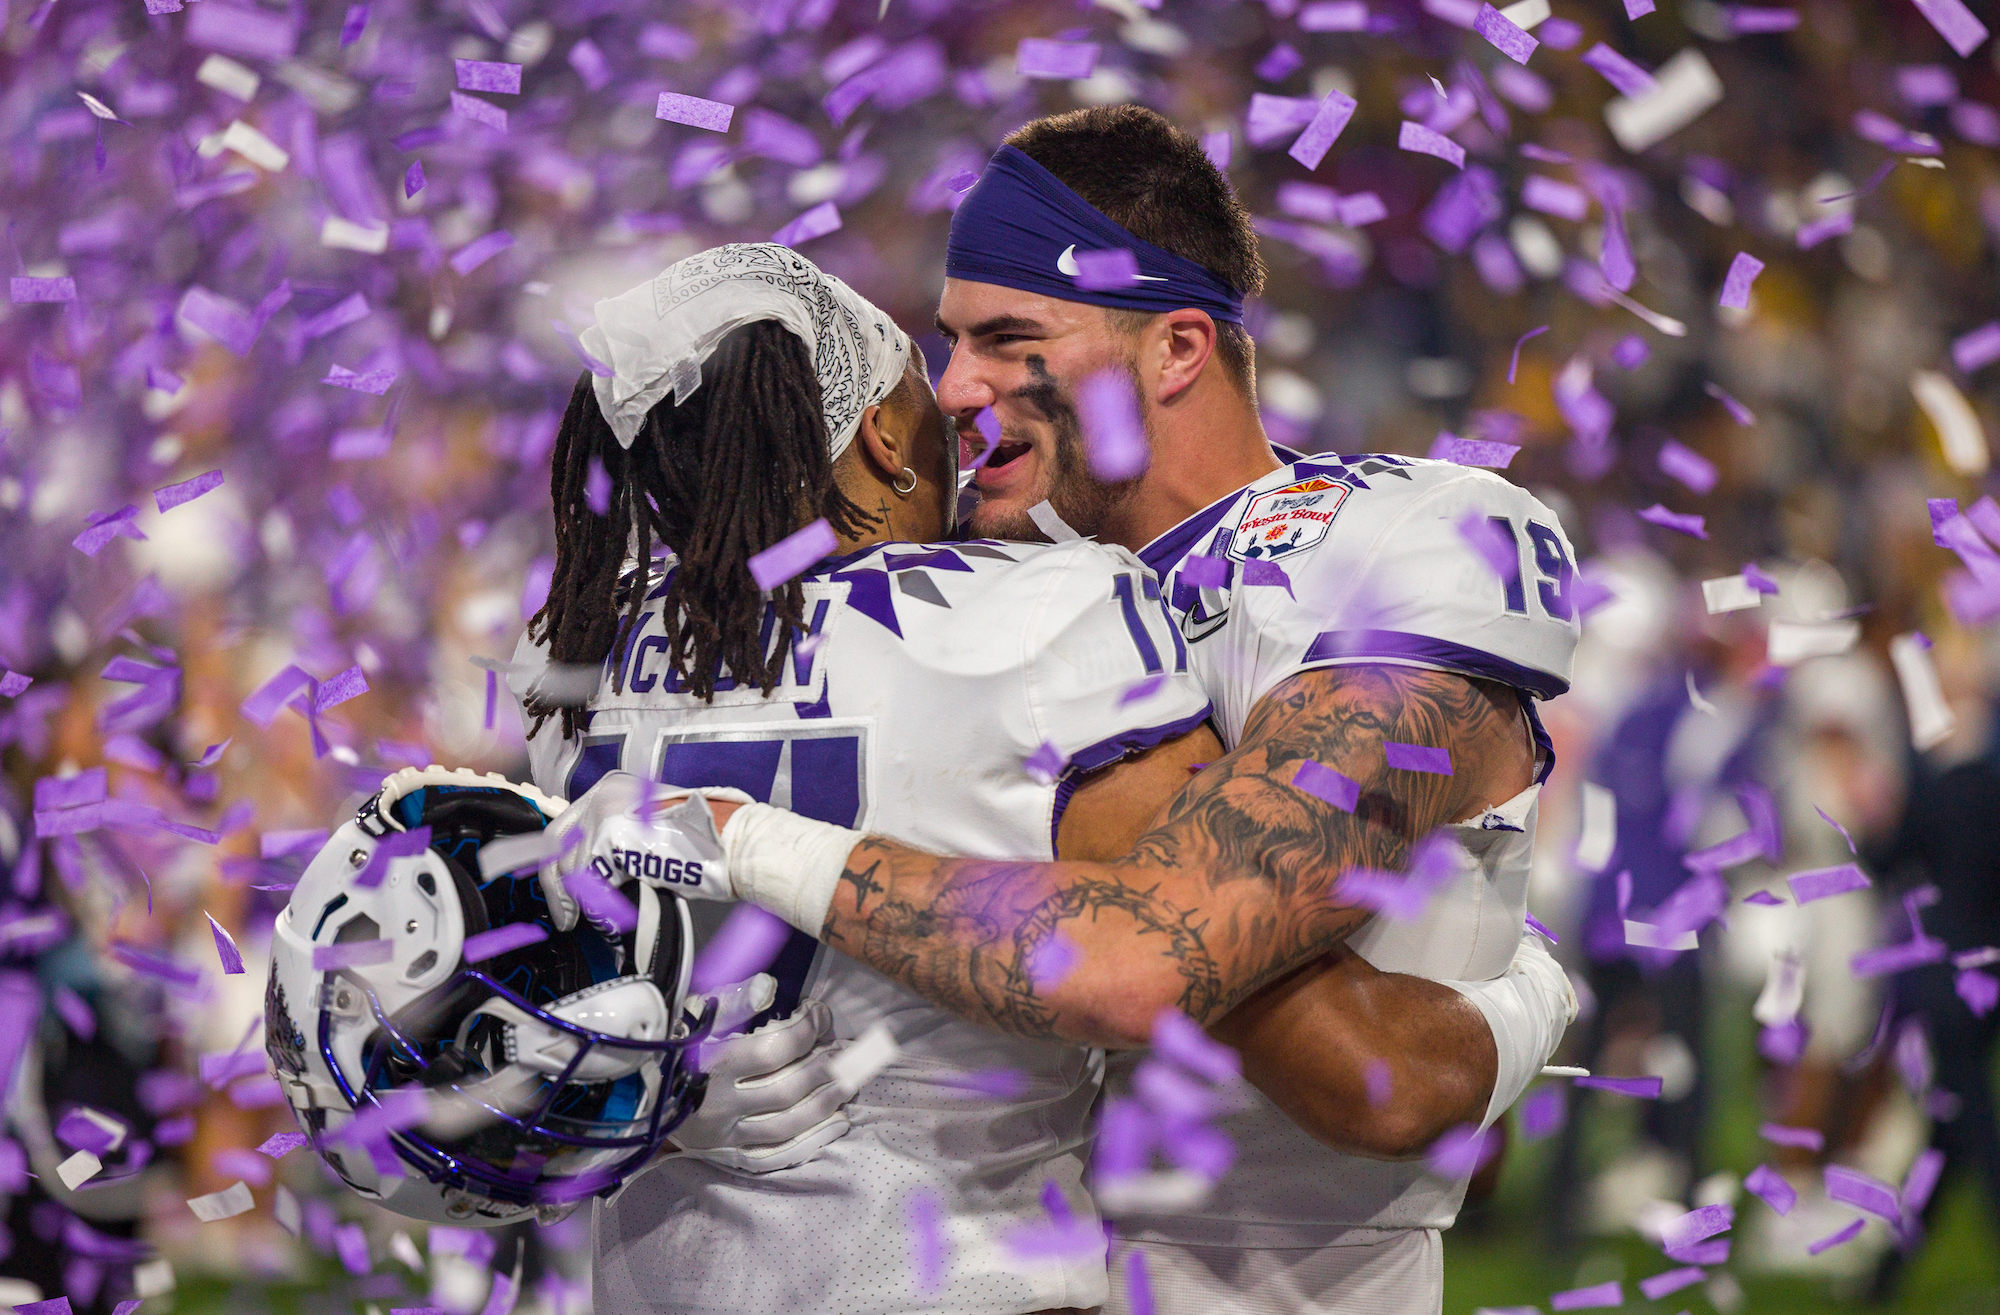 TCU Horned Frogs tight end Jared Wiley (19) hugs a teammate after the Vrbo Fiesta Bowl between the Michigan Wolverines and the TCU Horned Frogs on Saturday, December 31st, 2022 at State Farm Stadium in Glendale, AZ